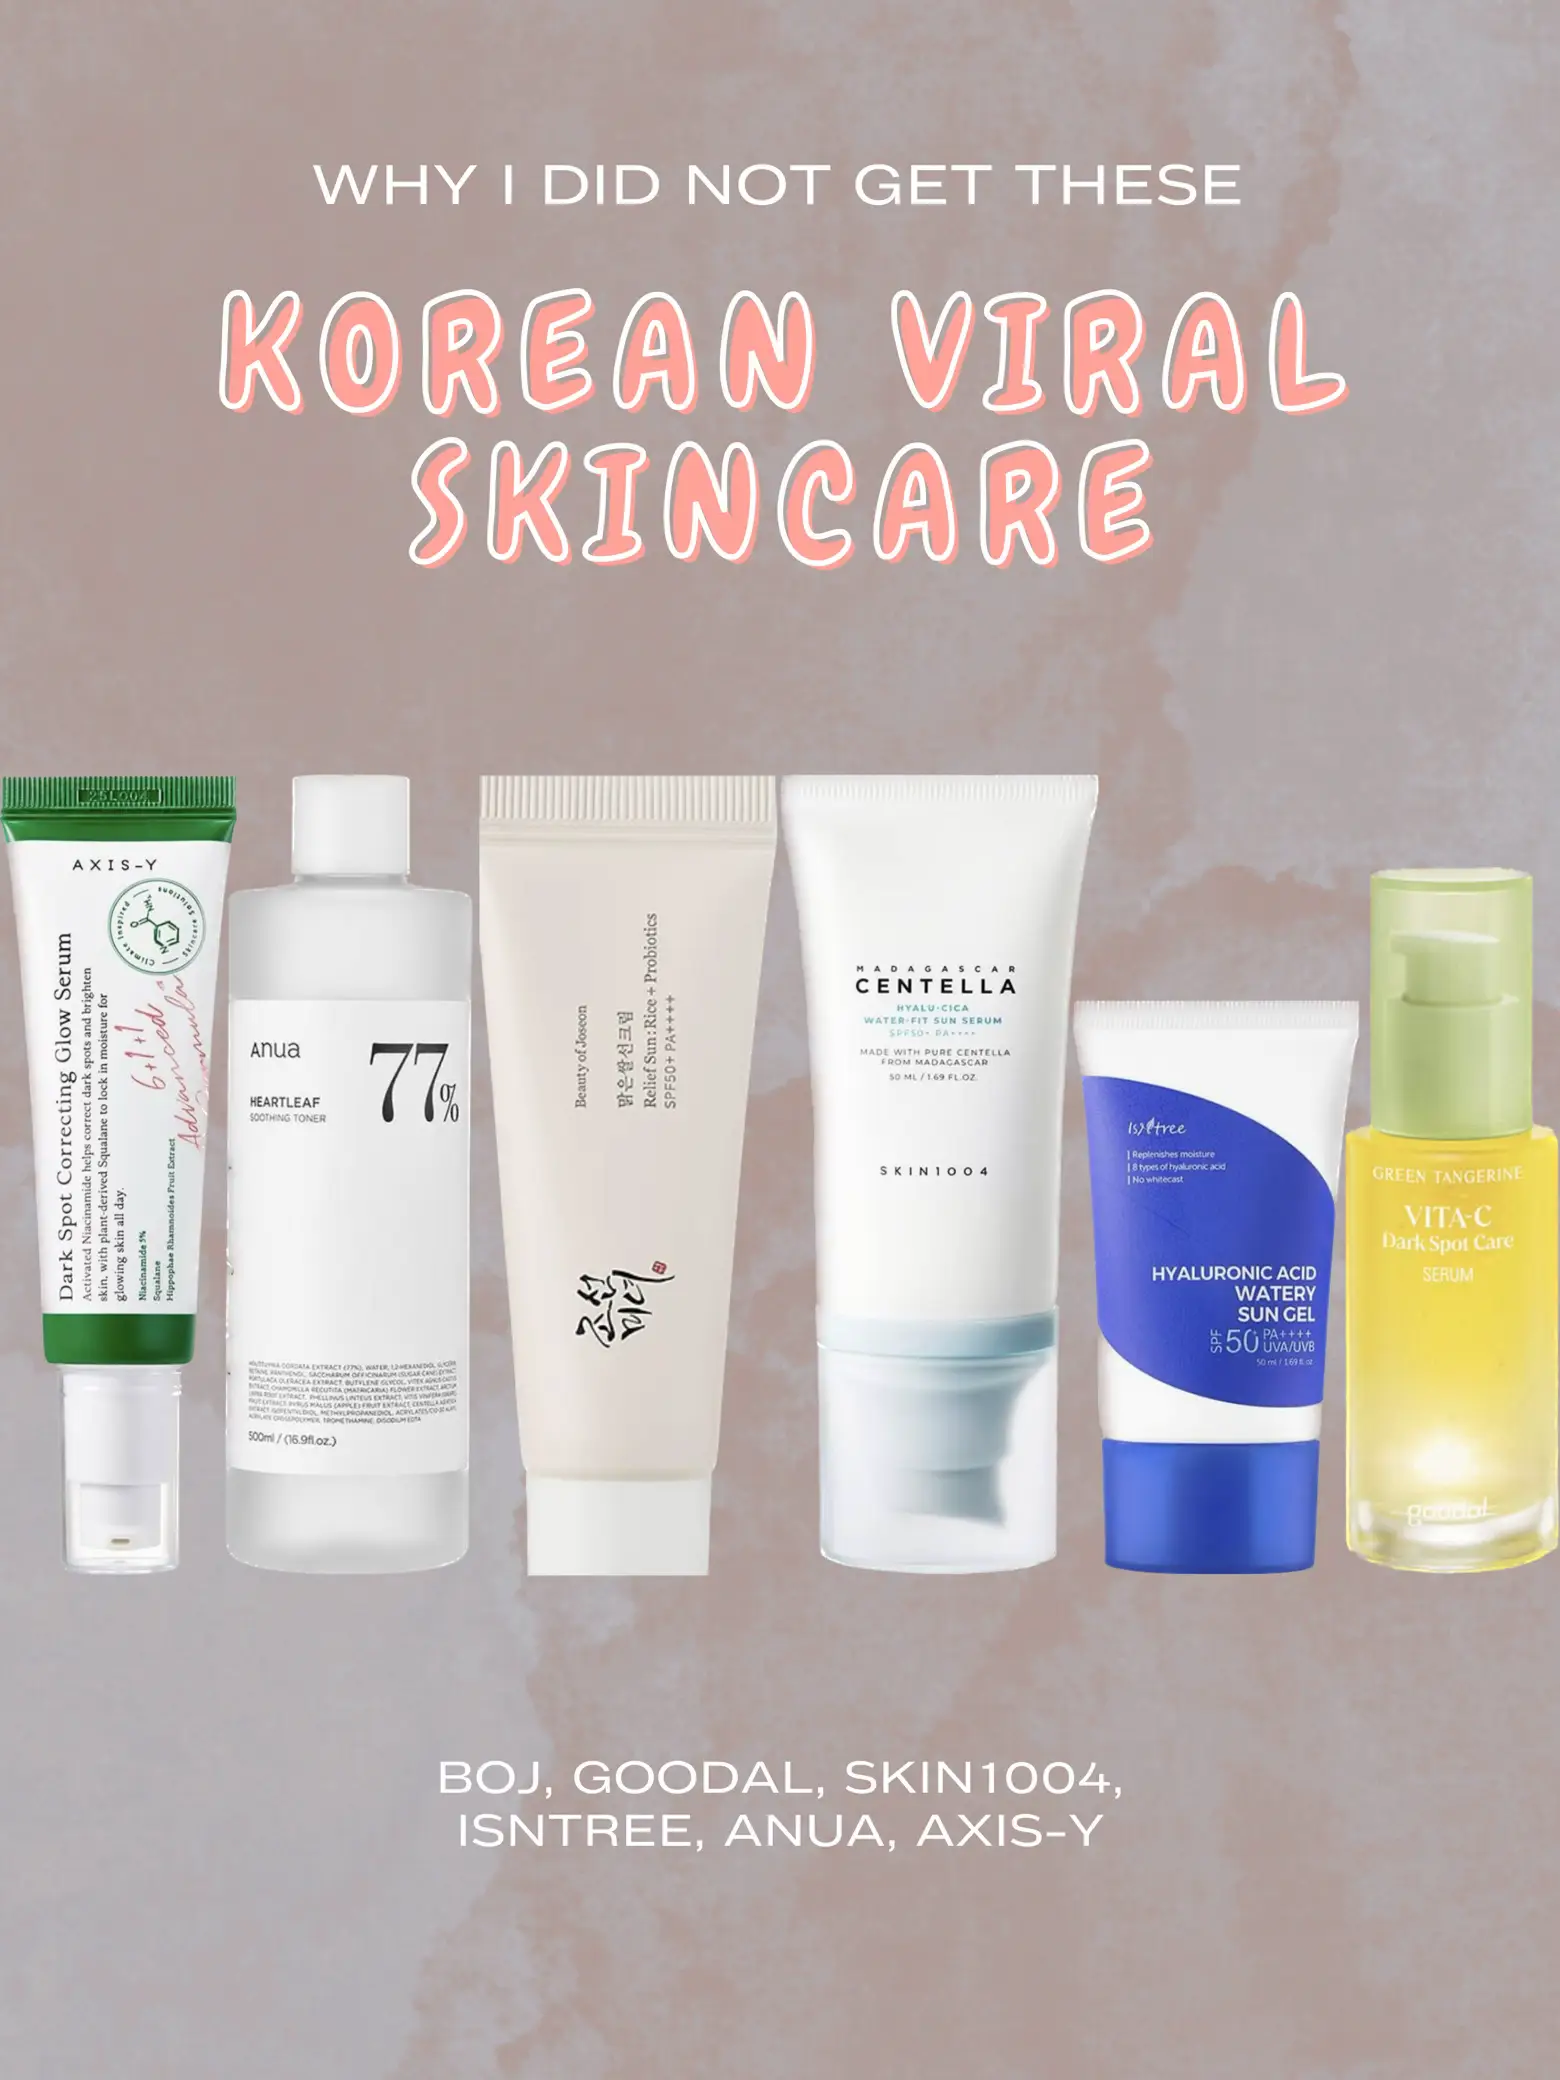 I didn’t get these VIRAL korean skincare ⁉️👀's images(0)